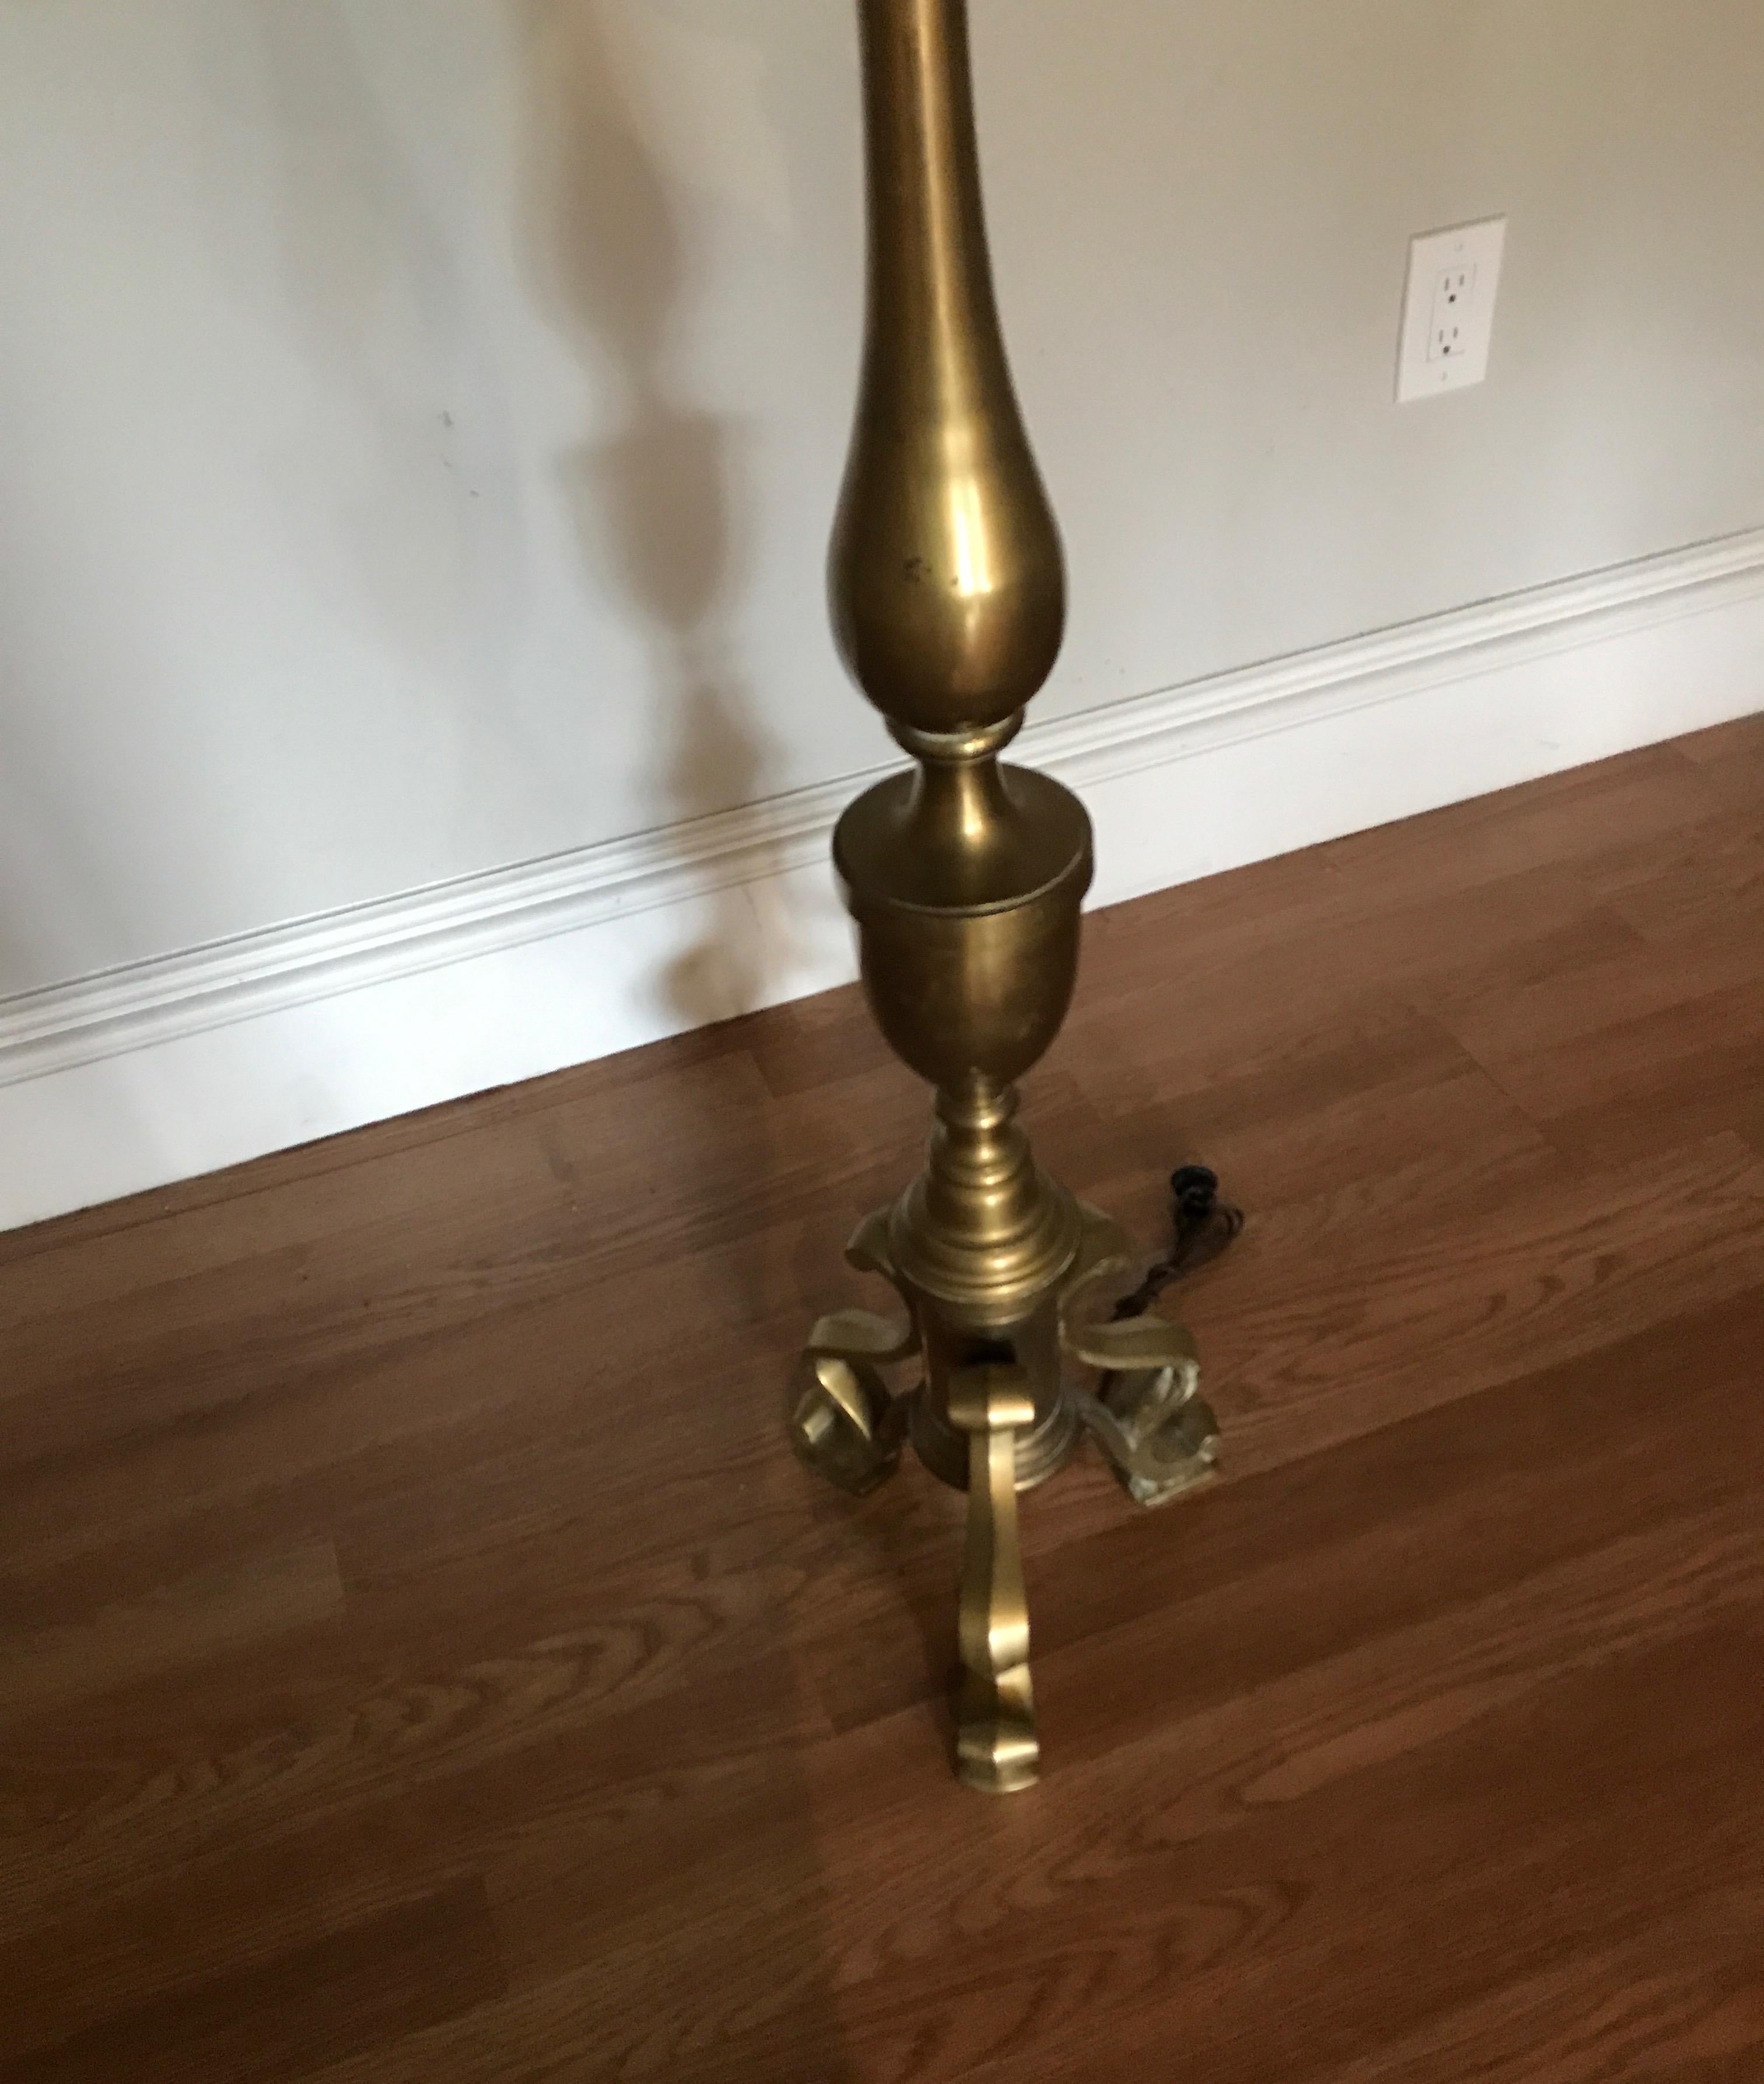 Solid brass candlestick floor lamp by Chapman.